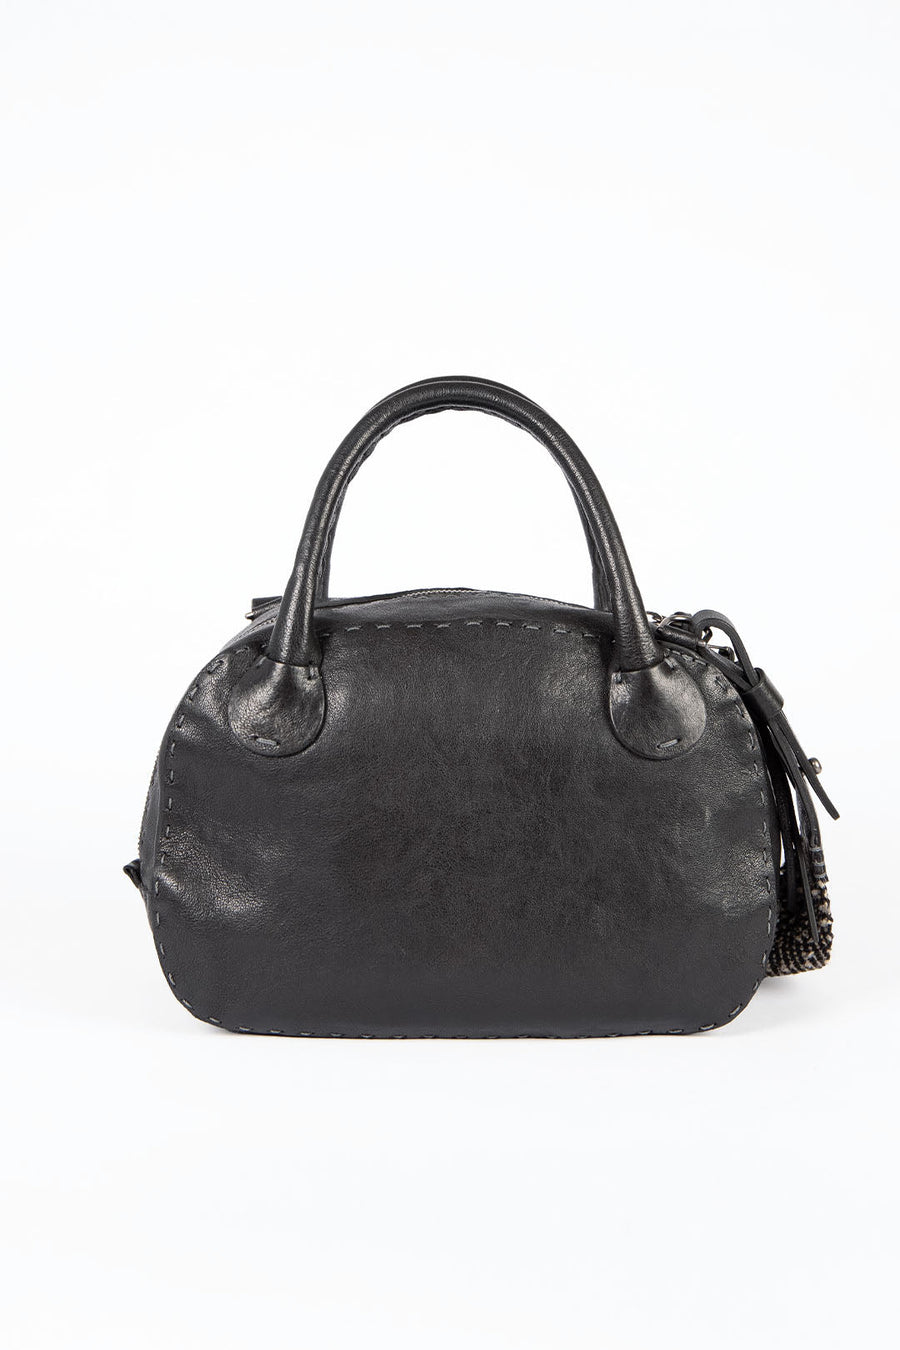 SMALL CROSS BODY BAG, BLACK - Burning Torch Online Boutique